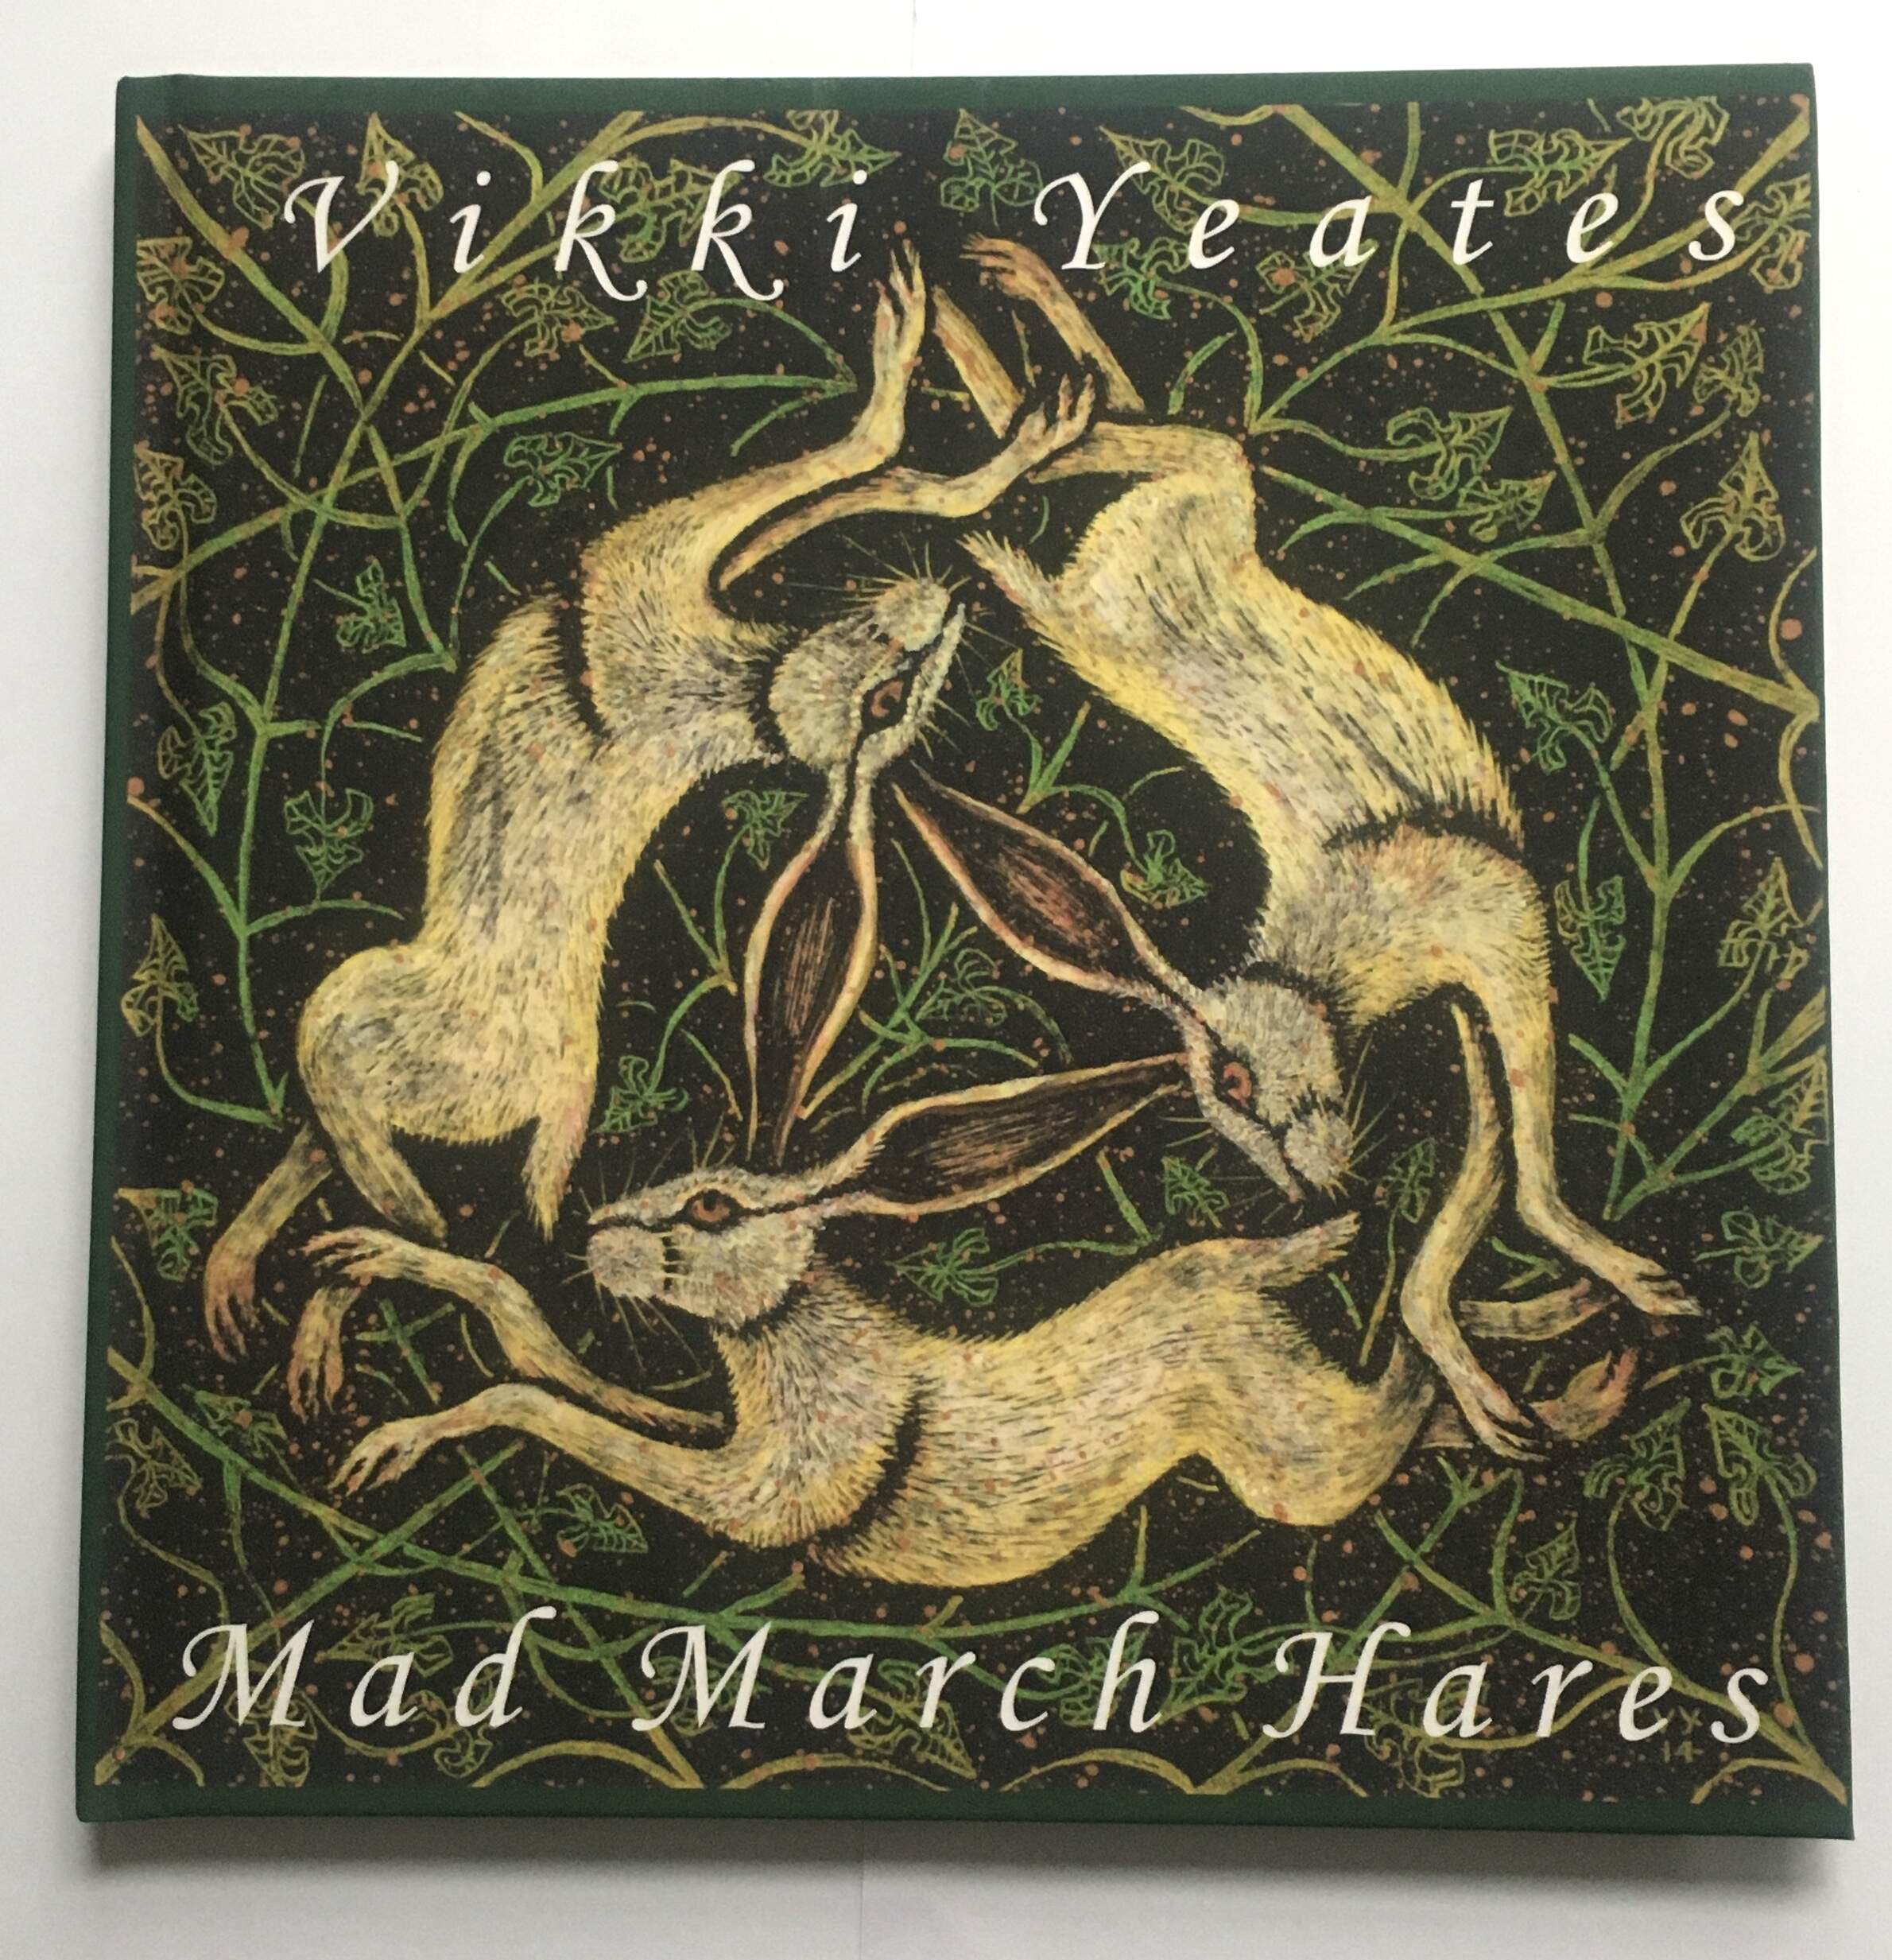 Hard back version of 'Mad March Hares'